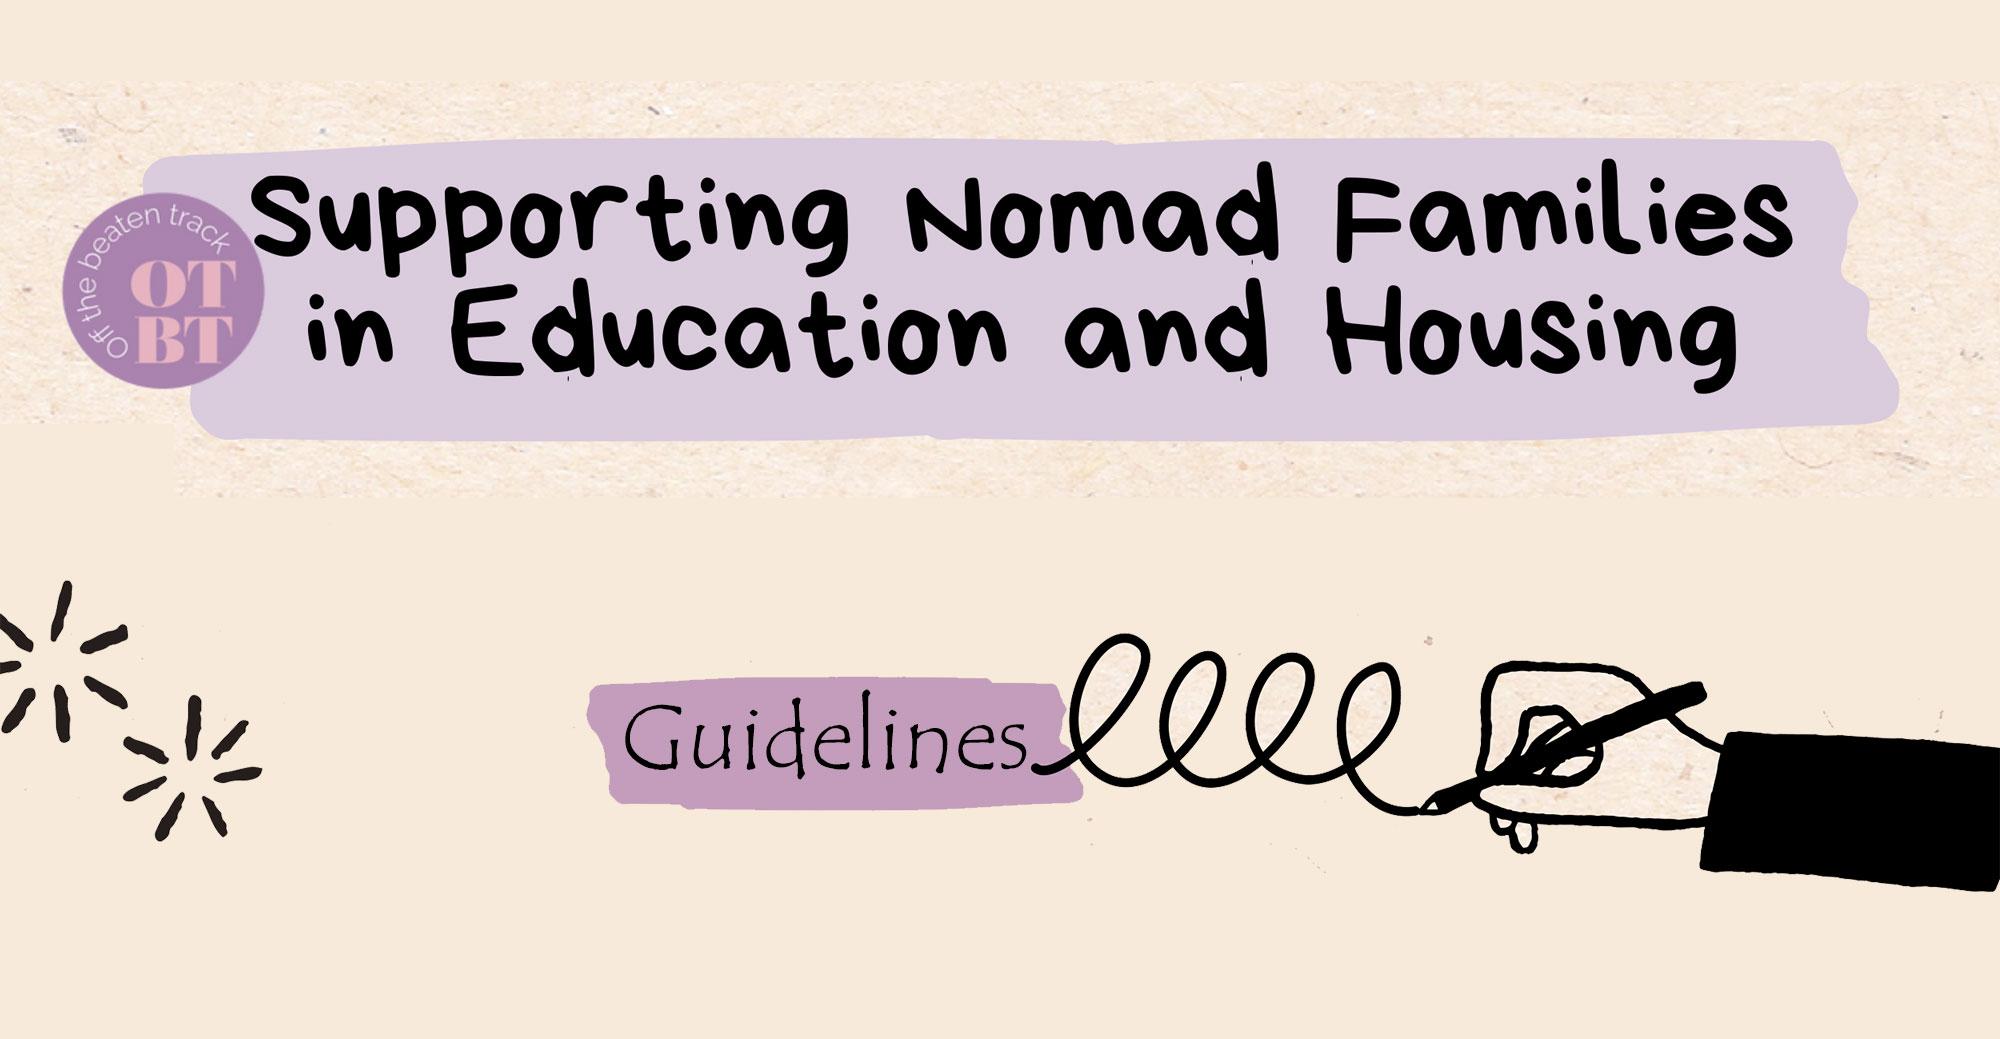 Supporting Nomad Families in Education and Housing